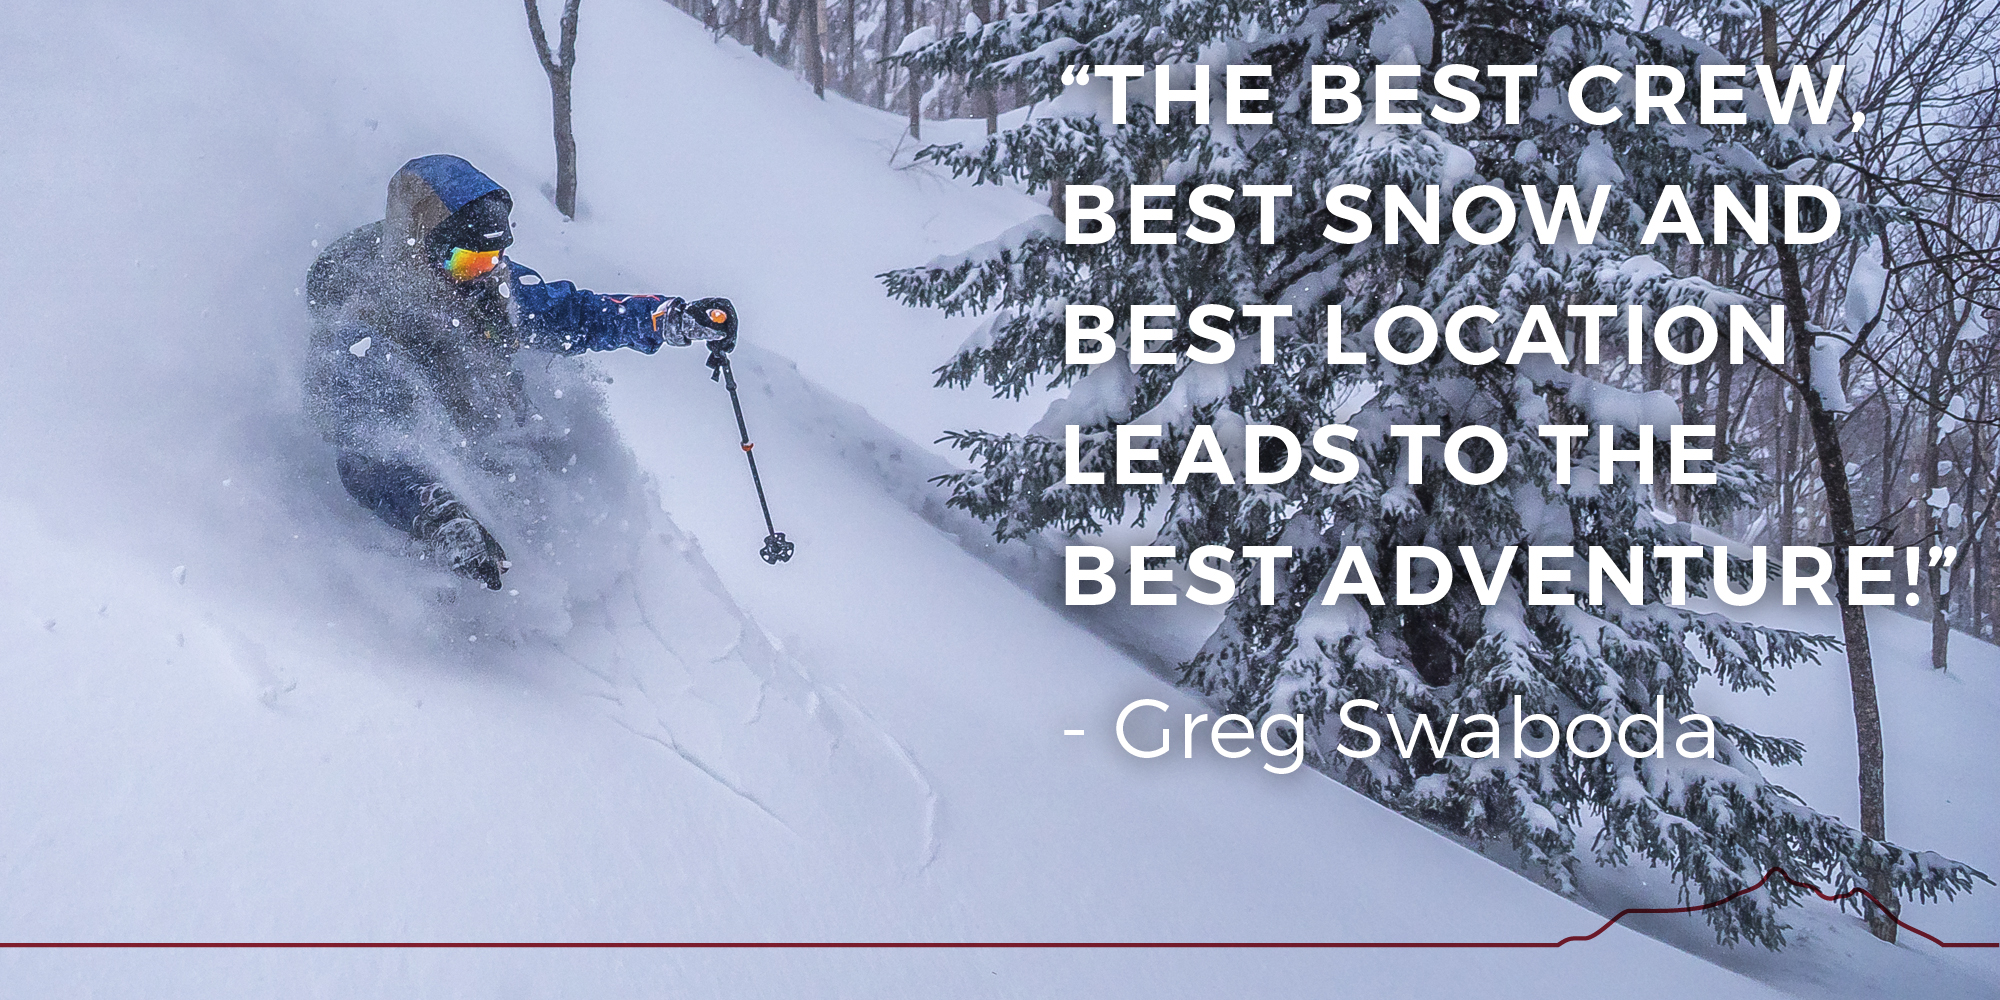 The best crew, best snow and best location leads to the best adventure! - Greg Swaboda